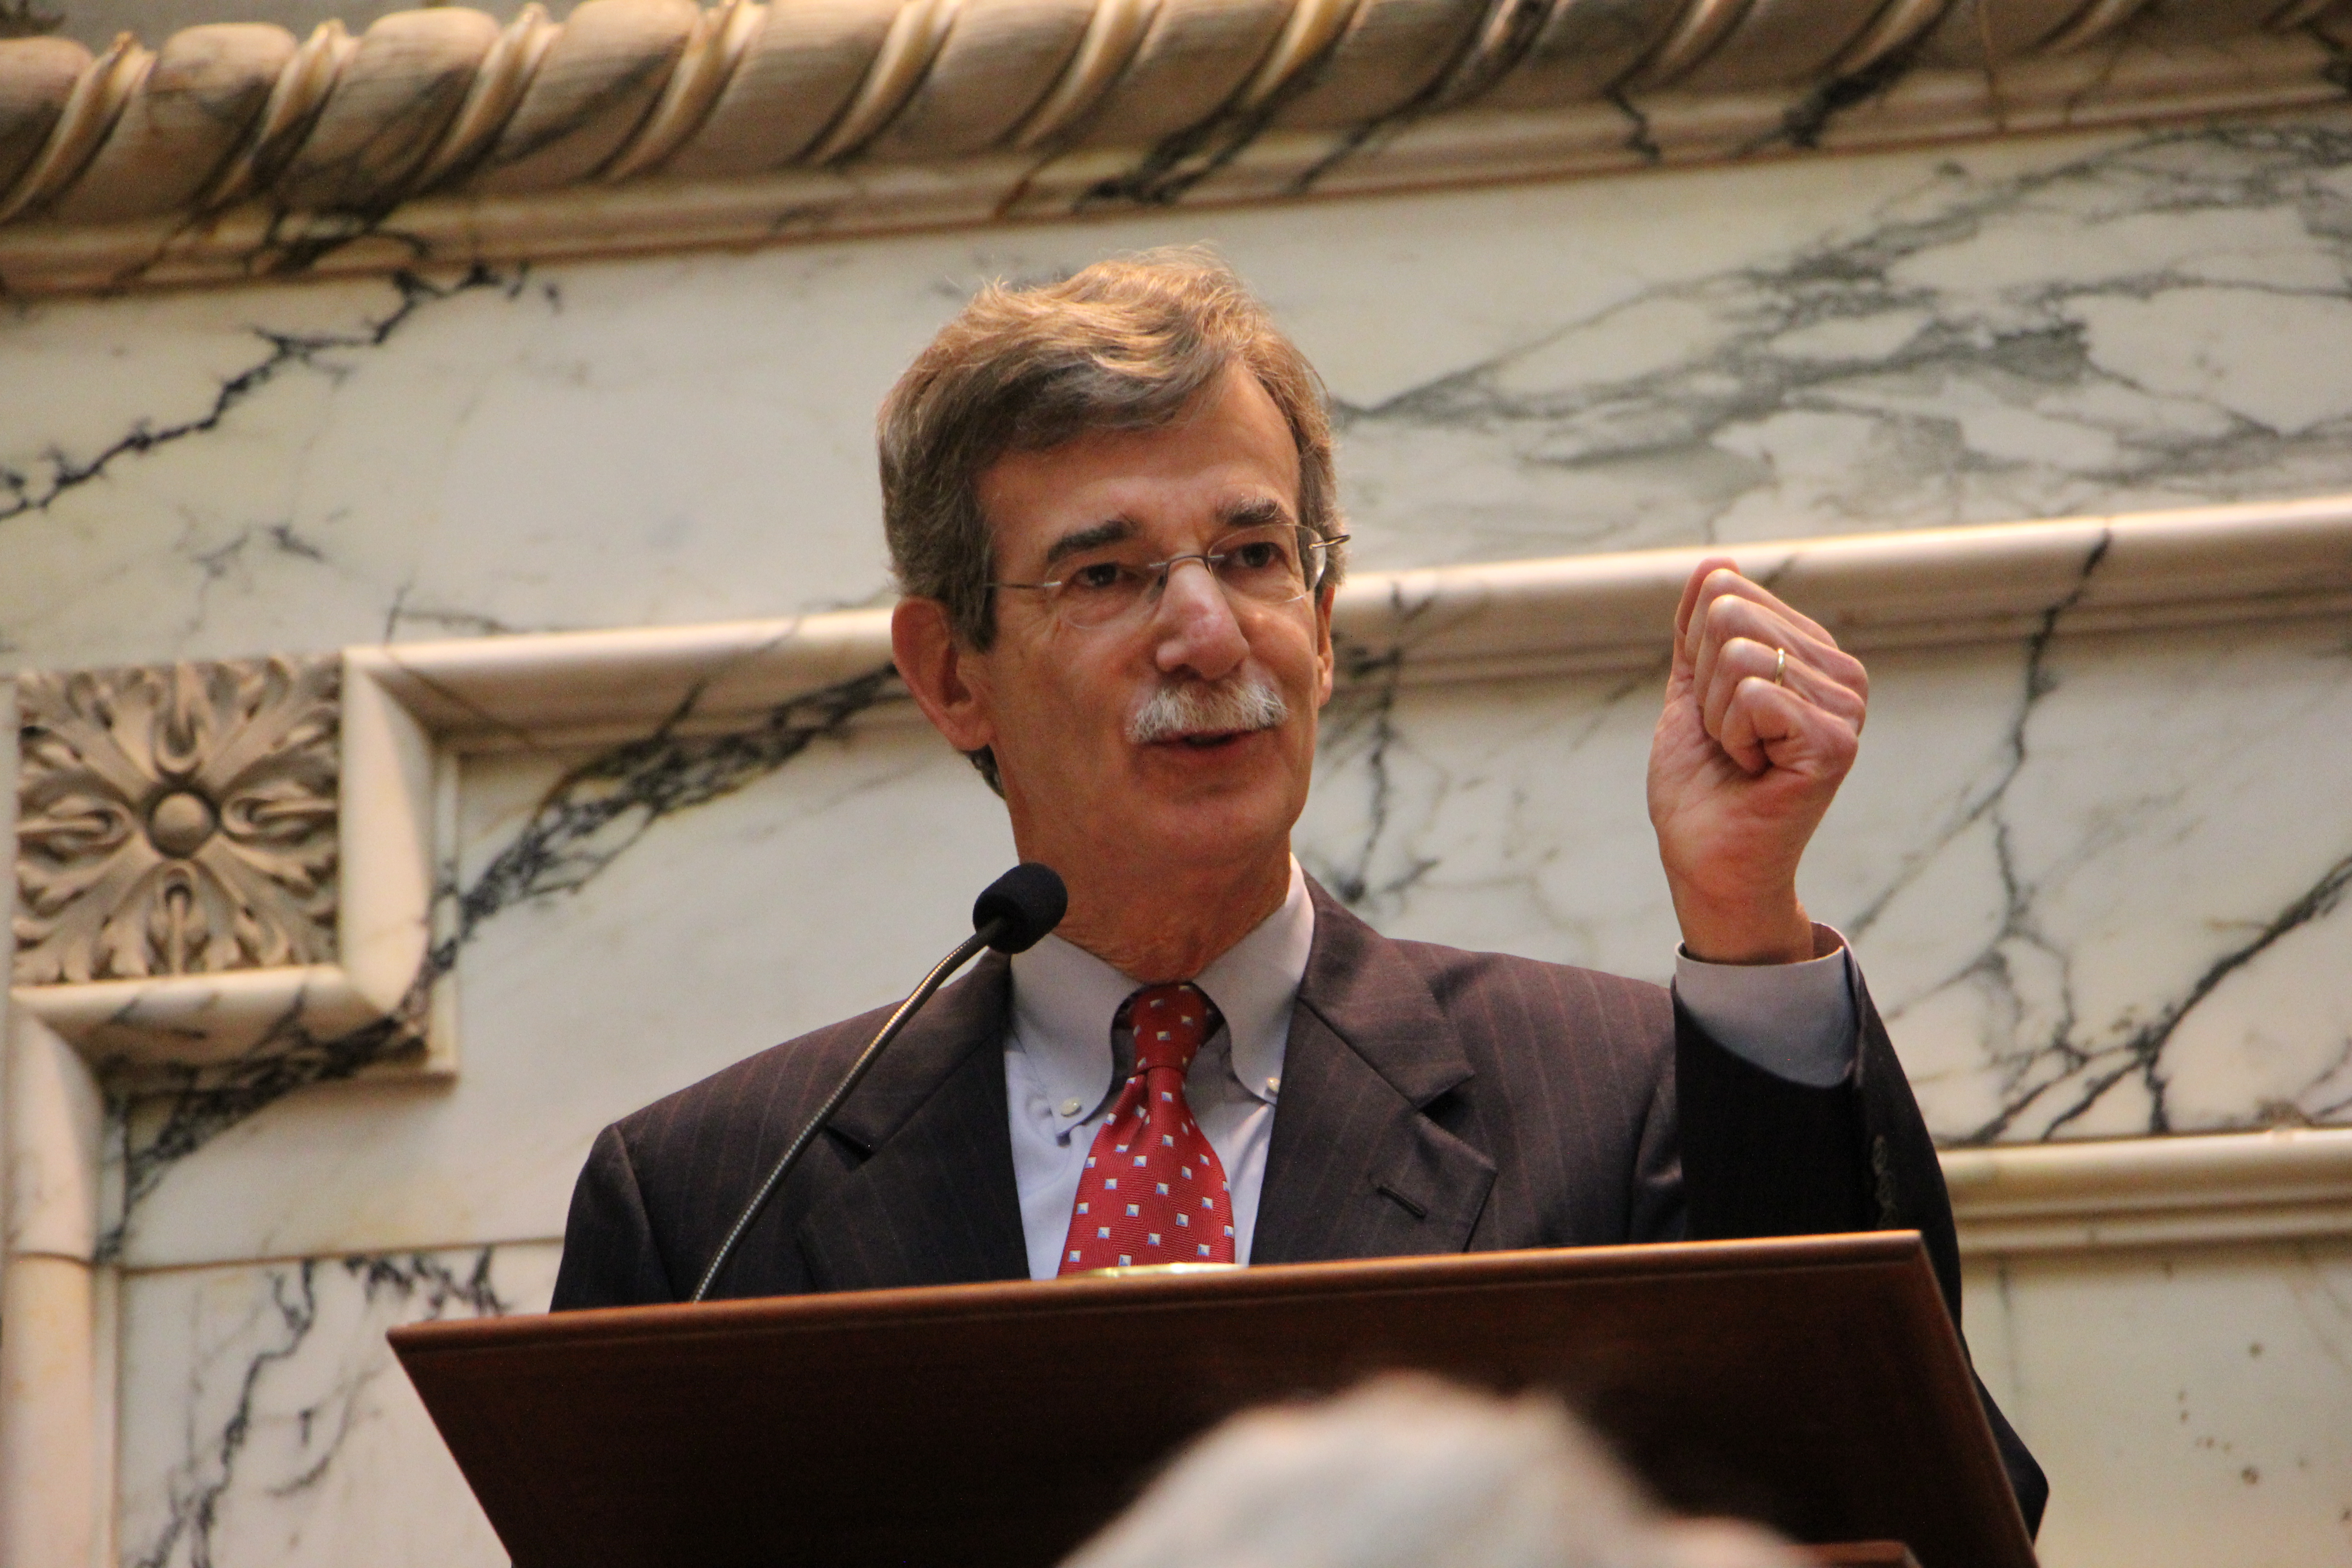 Maryland Attorney General Brian Frosh gives a speech after being sworn in as Maryland’s 46th attorney general on Tuesday, Jan. 6, 2015, in Annapolis, Maryland. (Photo courtesy of Maryland Office of the Attorney General)